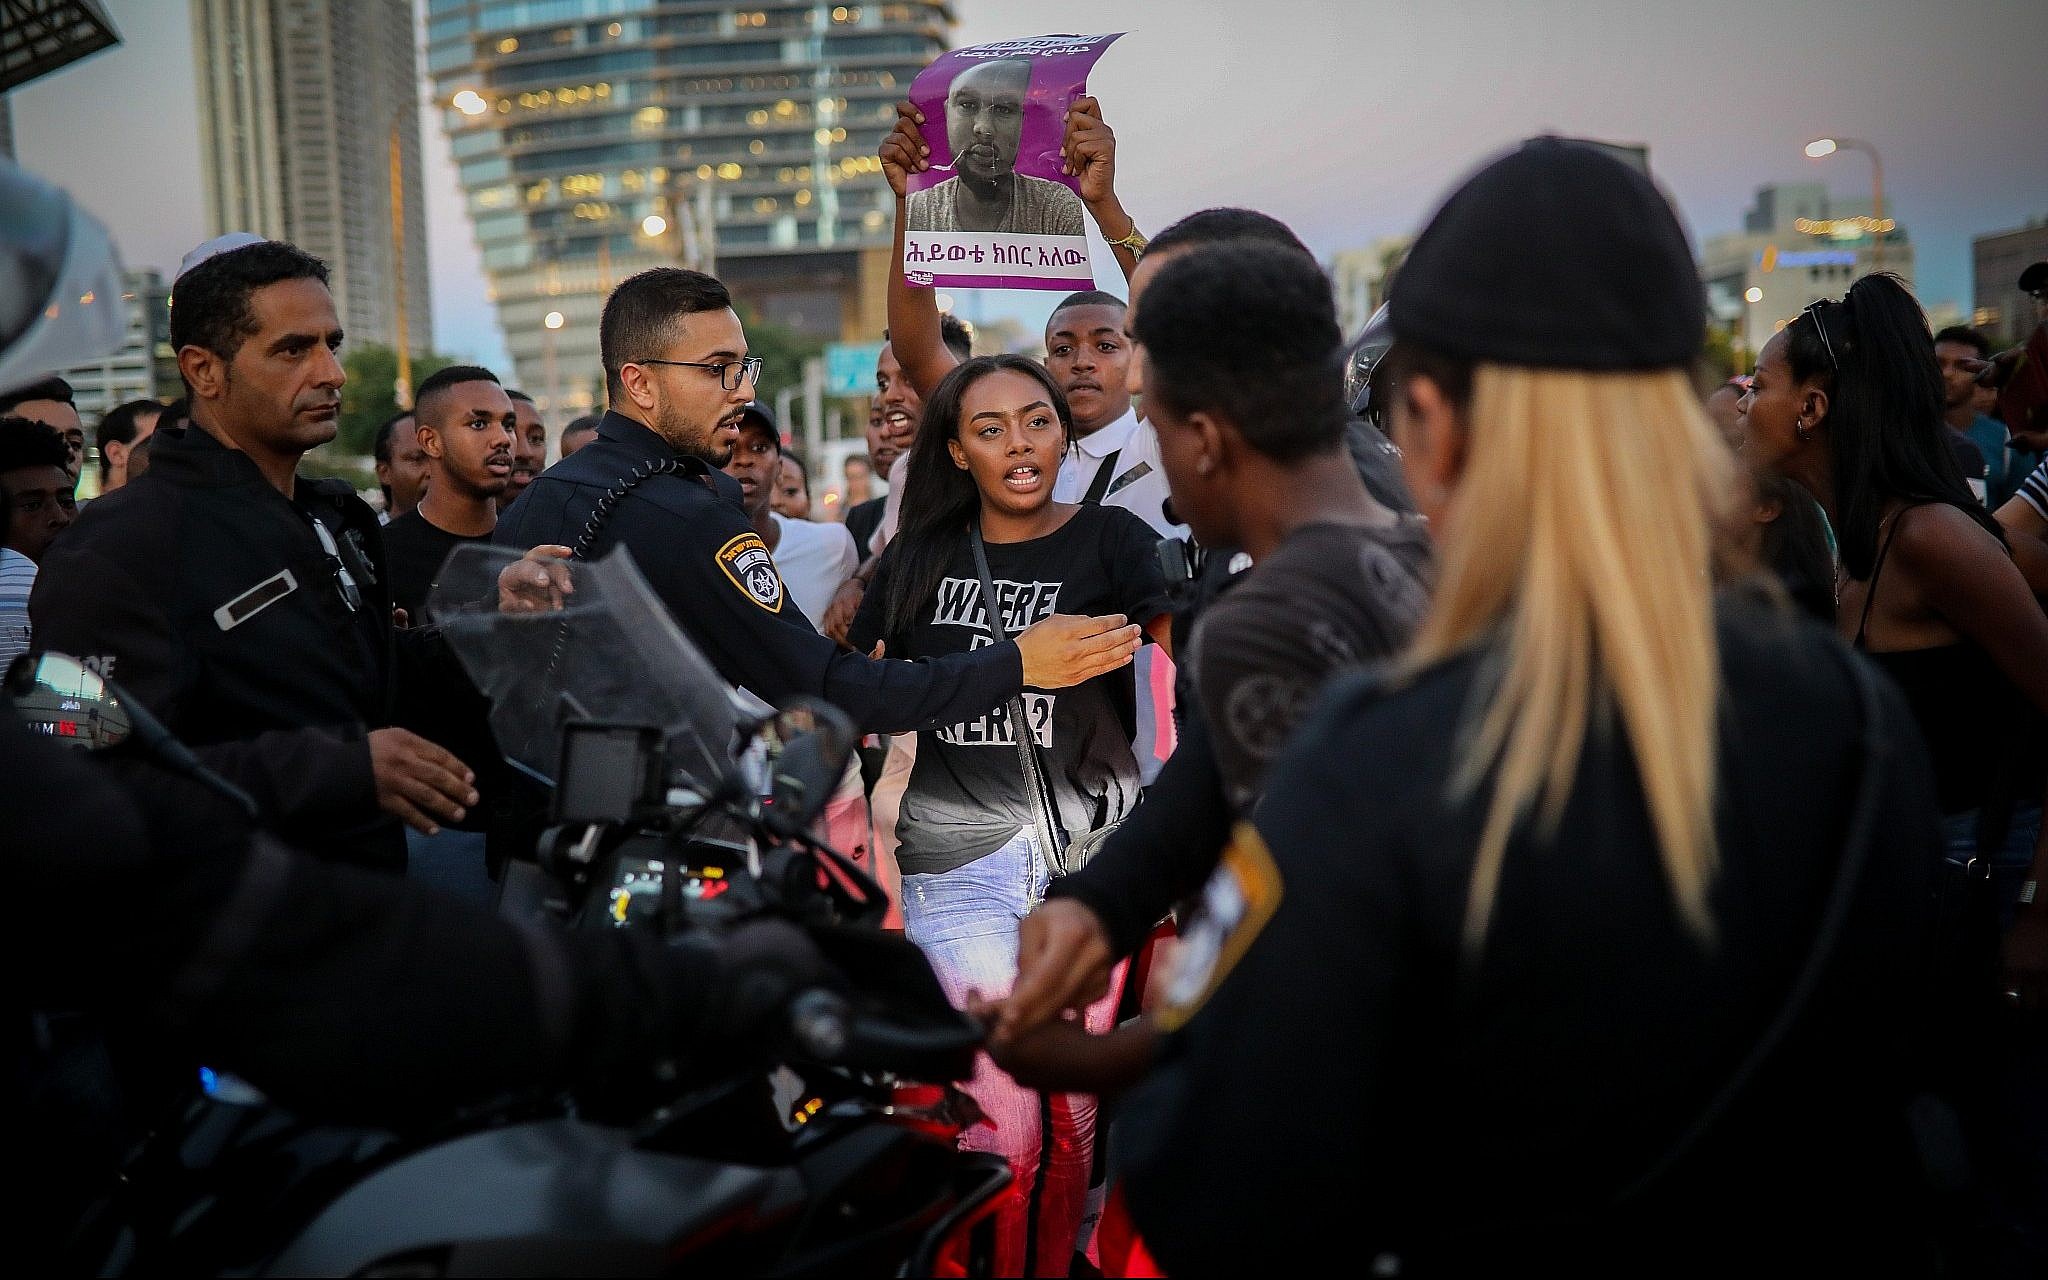 Ethiopian-Israeli Activists Plan to Continue Protesting Netanyahu Government’s Failure to Bring More Ethiopian Jews to Israel